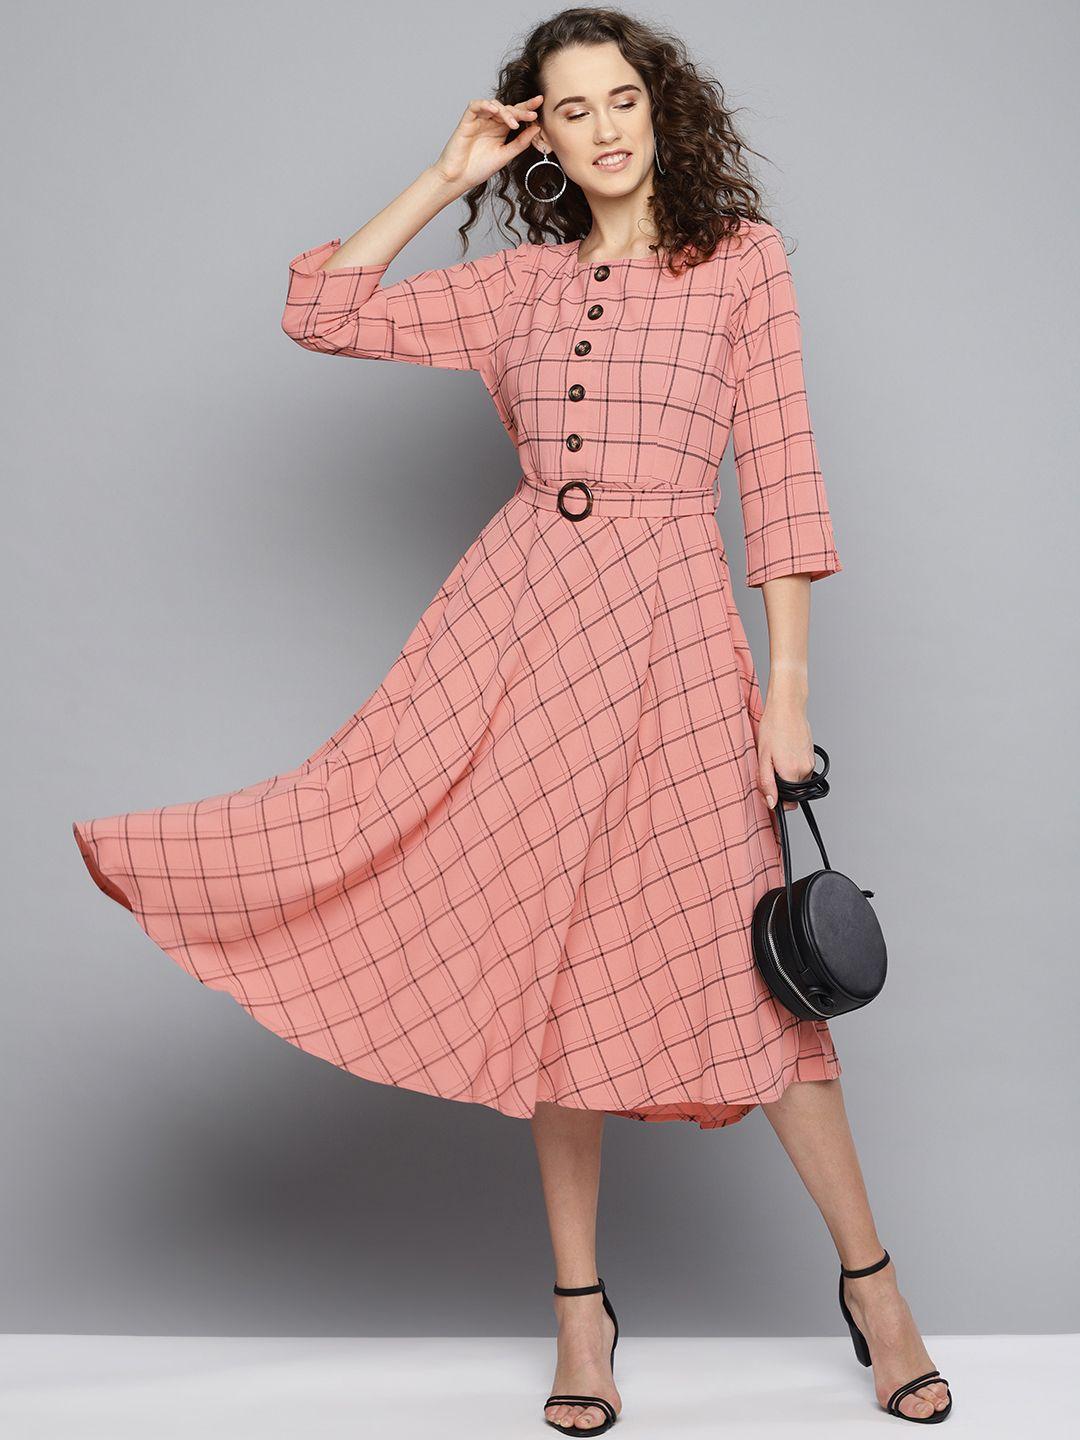 marie claire women pink & black checked midi fit & flare dress